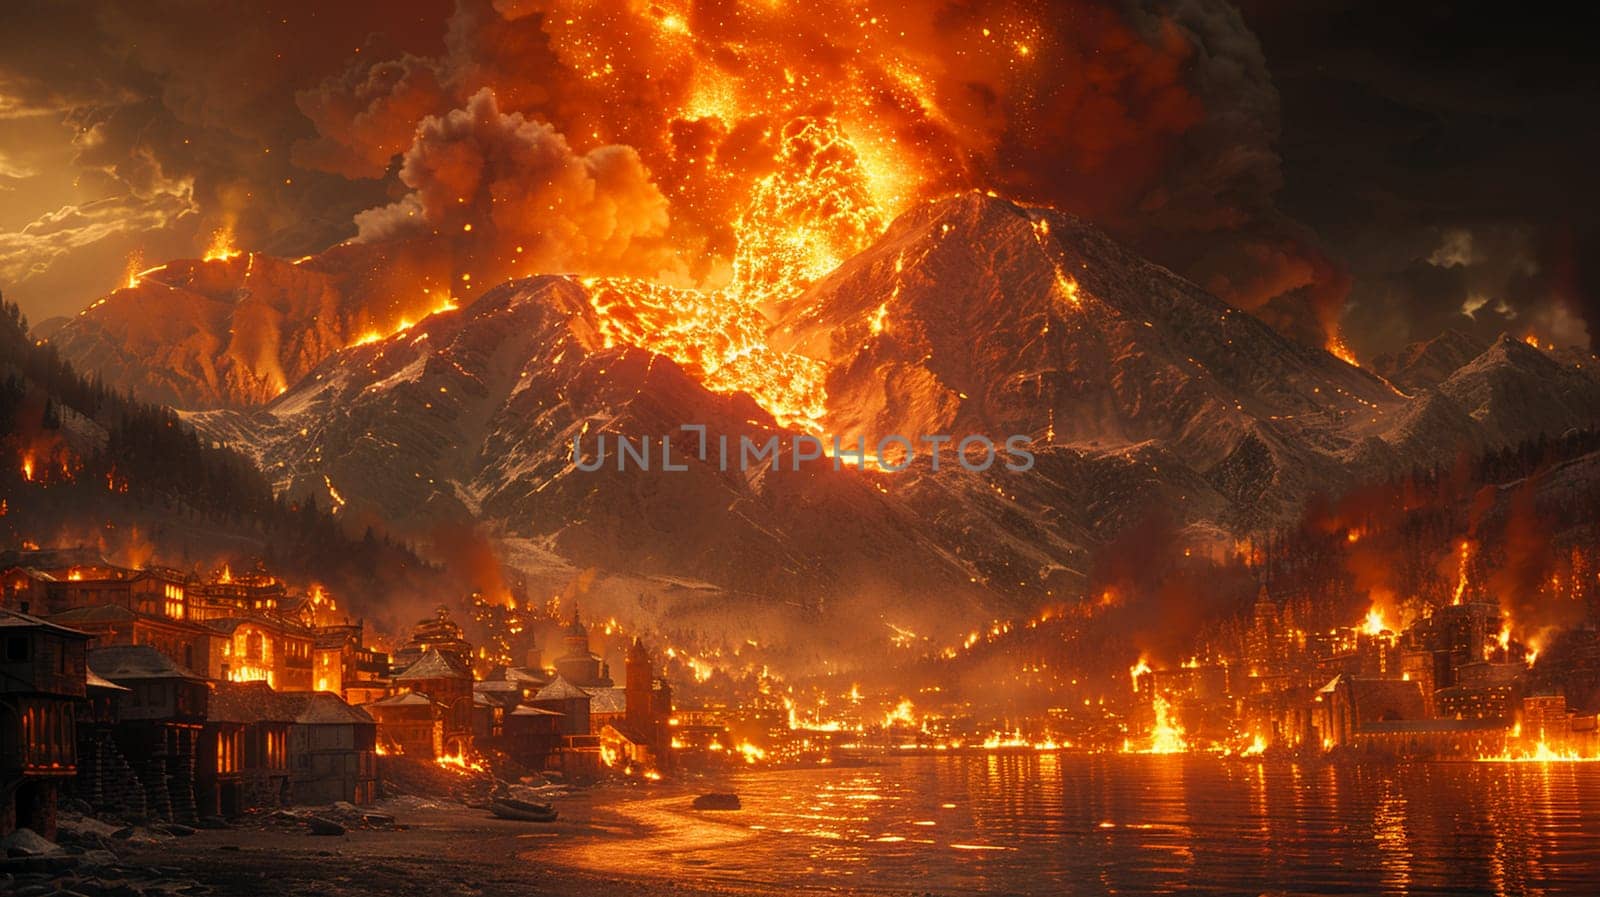 Majestic night view of volcanic eruption: sky ablaze above buildings, reflecting devastating natural disaster